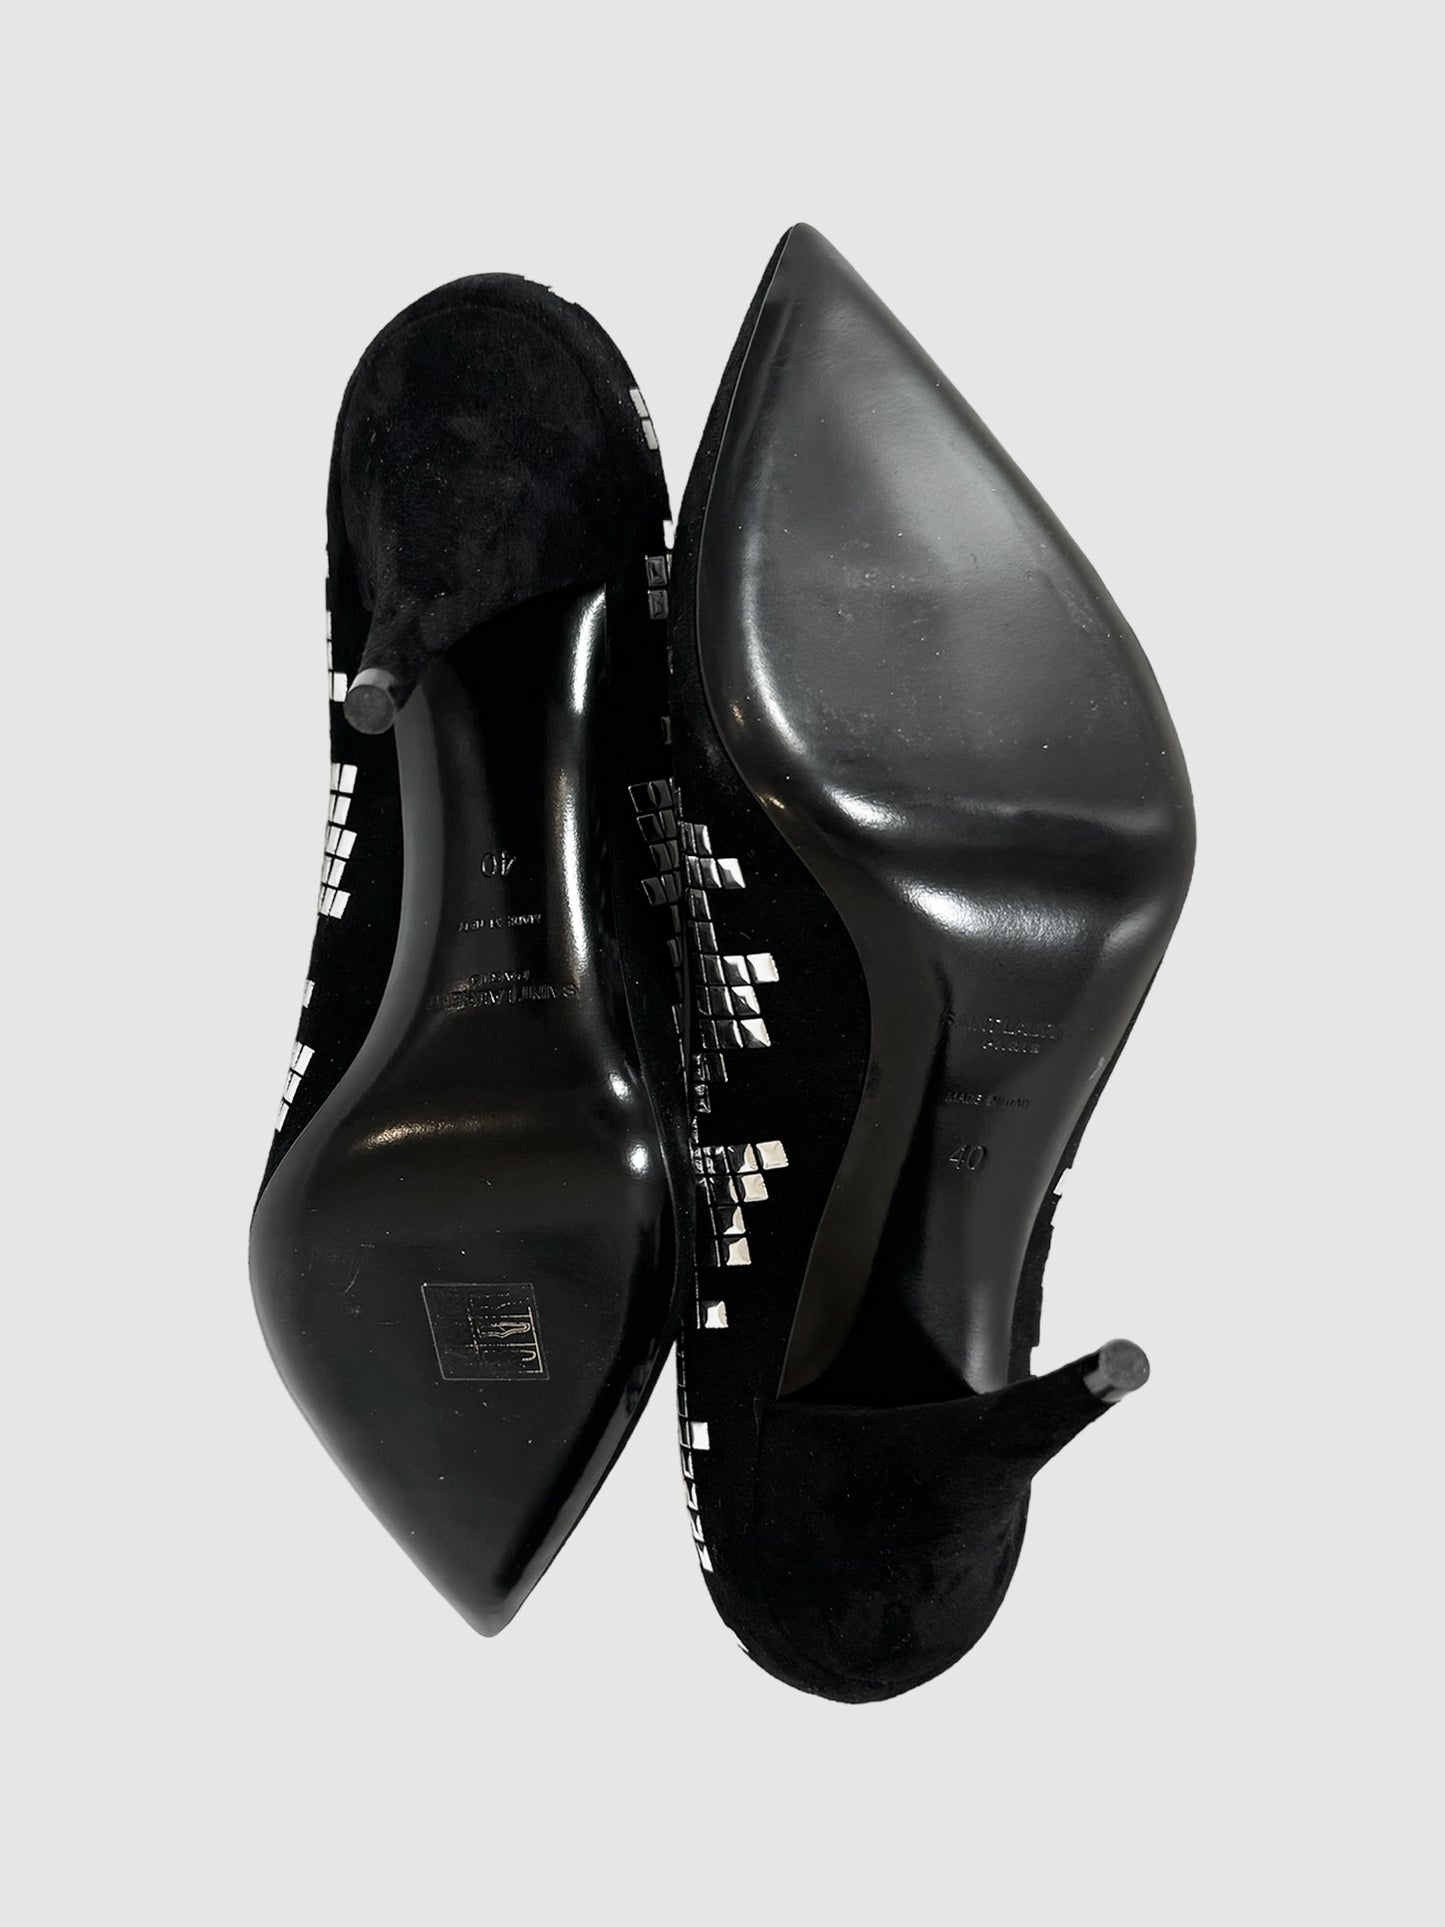 Suede Studded Pumps - Size 40